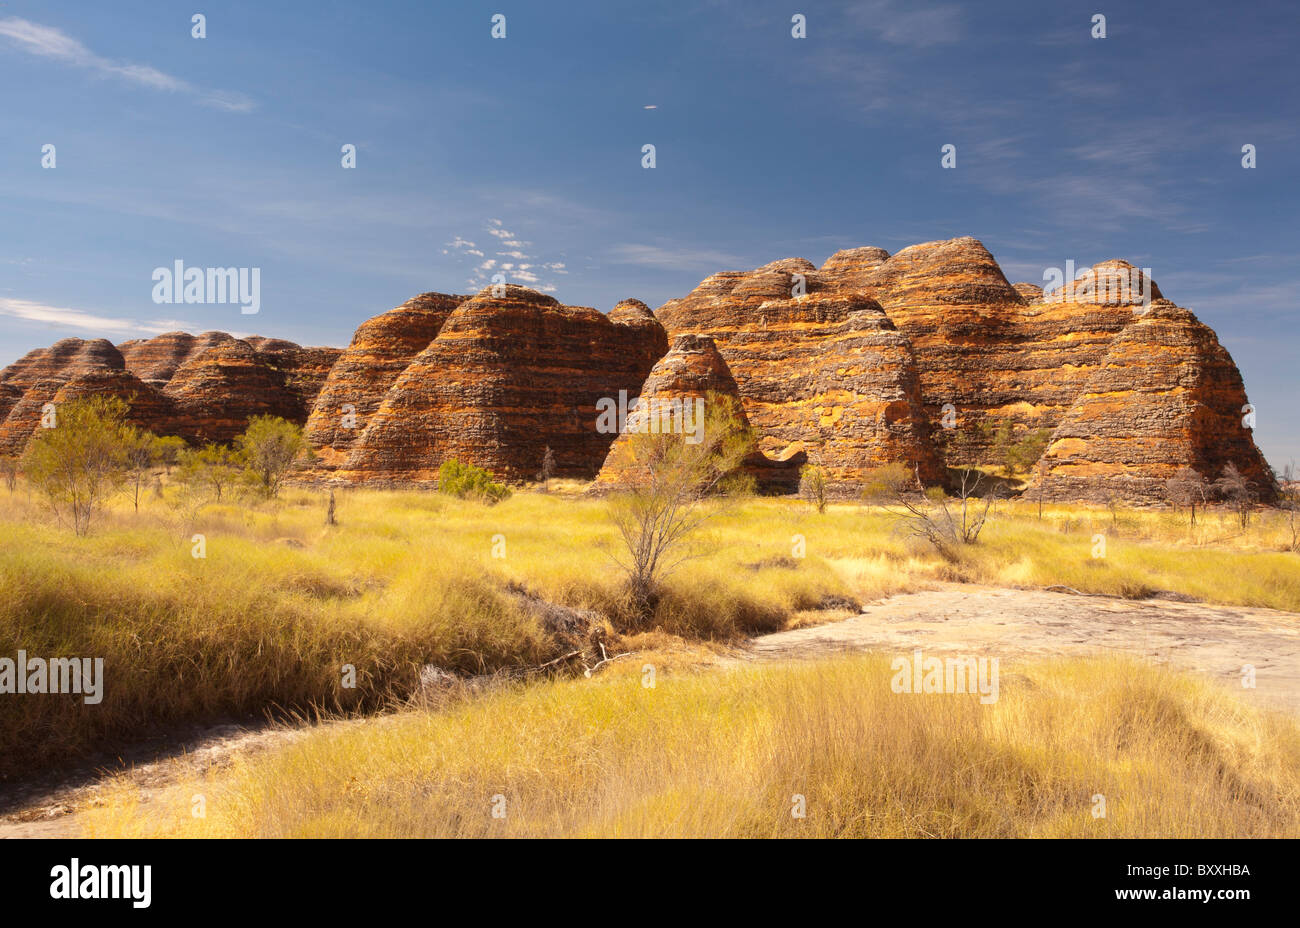 Conical rock formations at the Bungle Bungles, Purnululu National Park, Kimberley, Western Australia Stock Photo